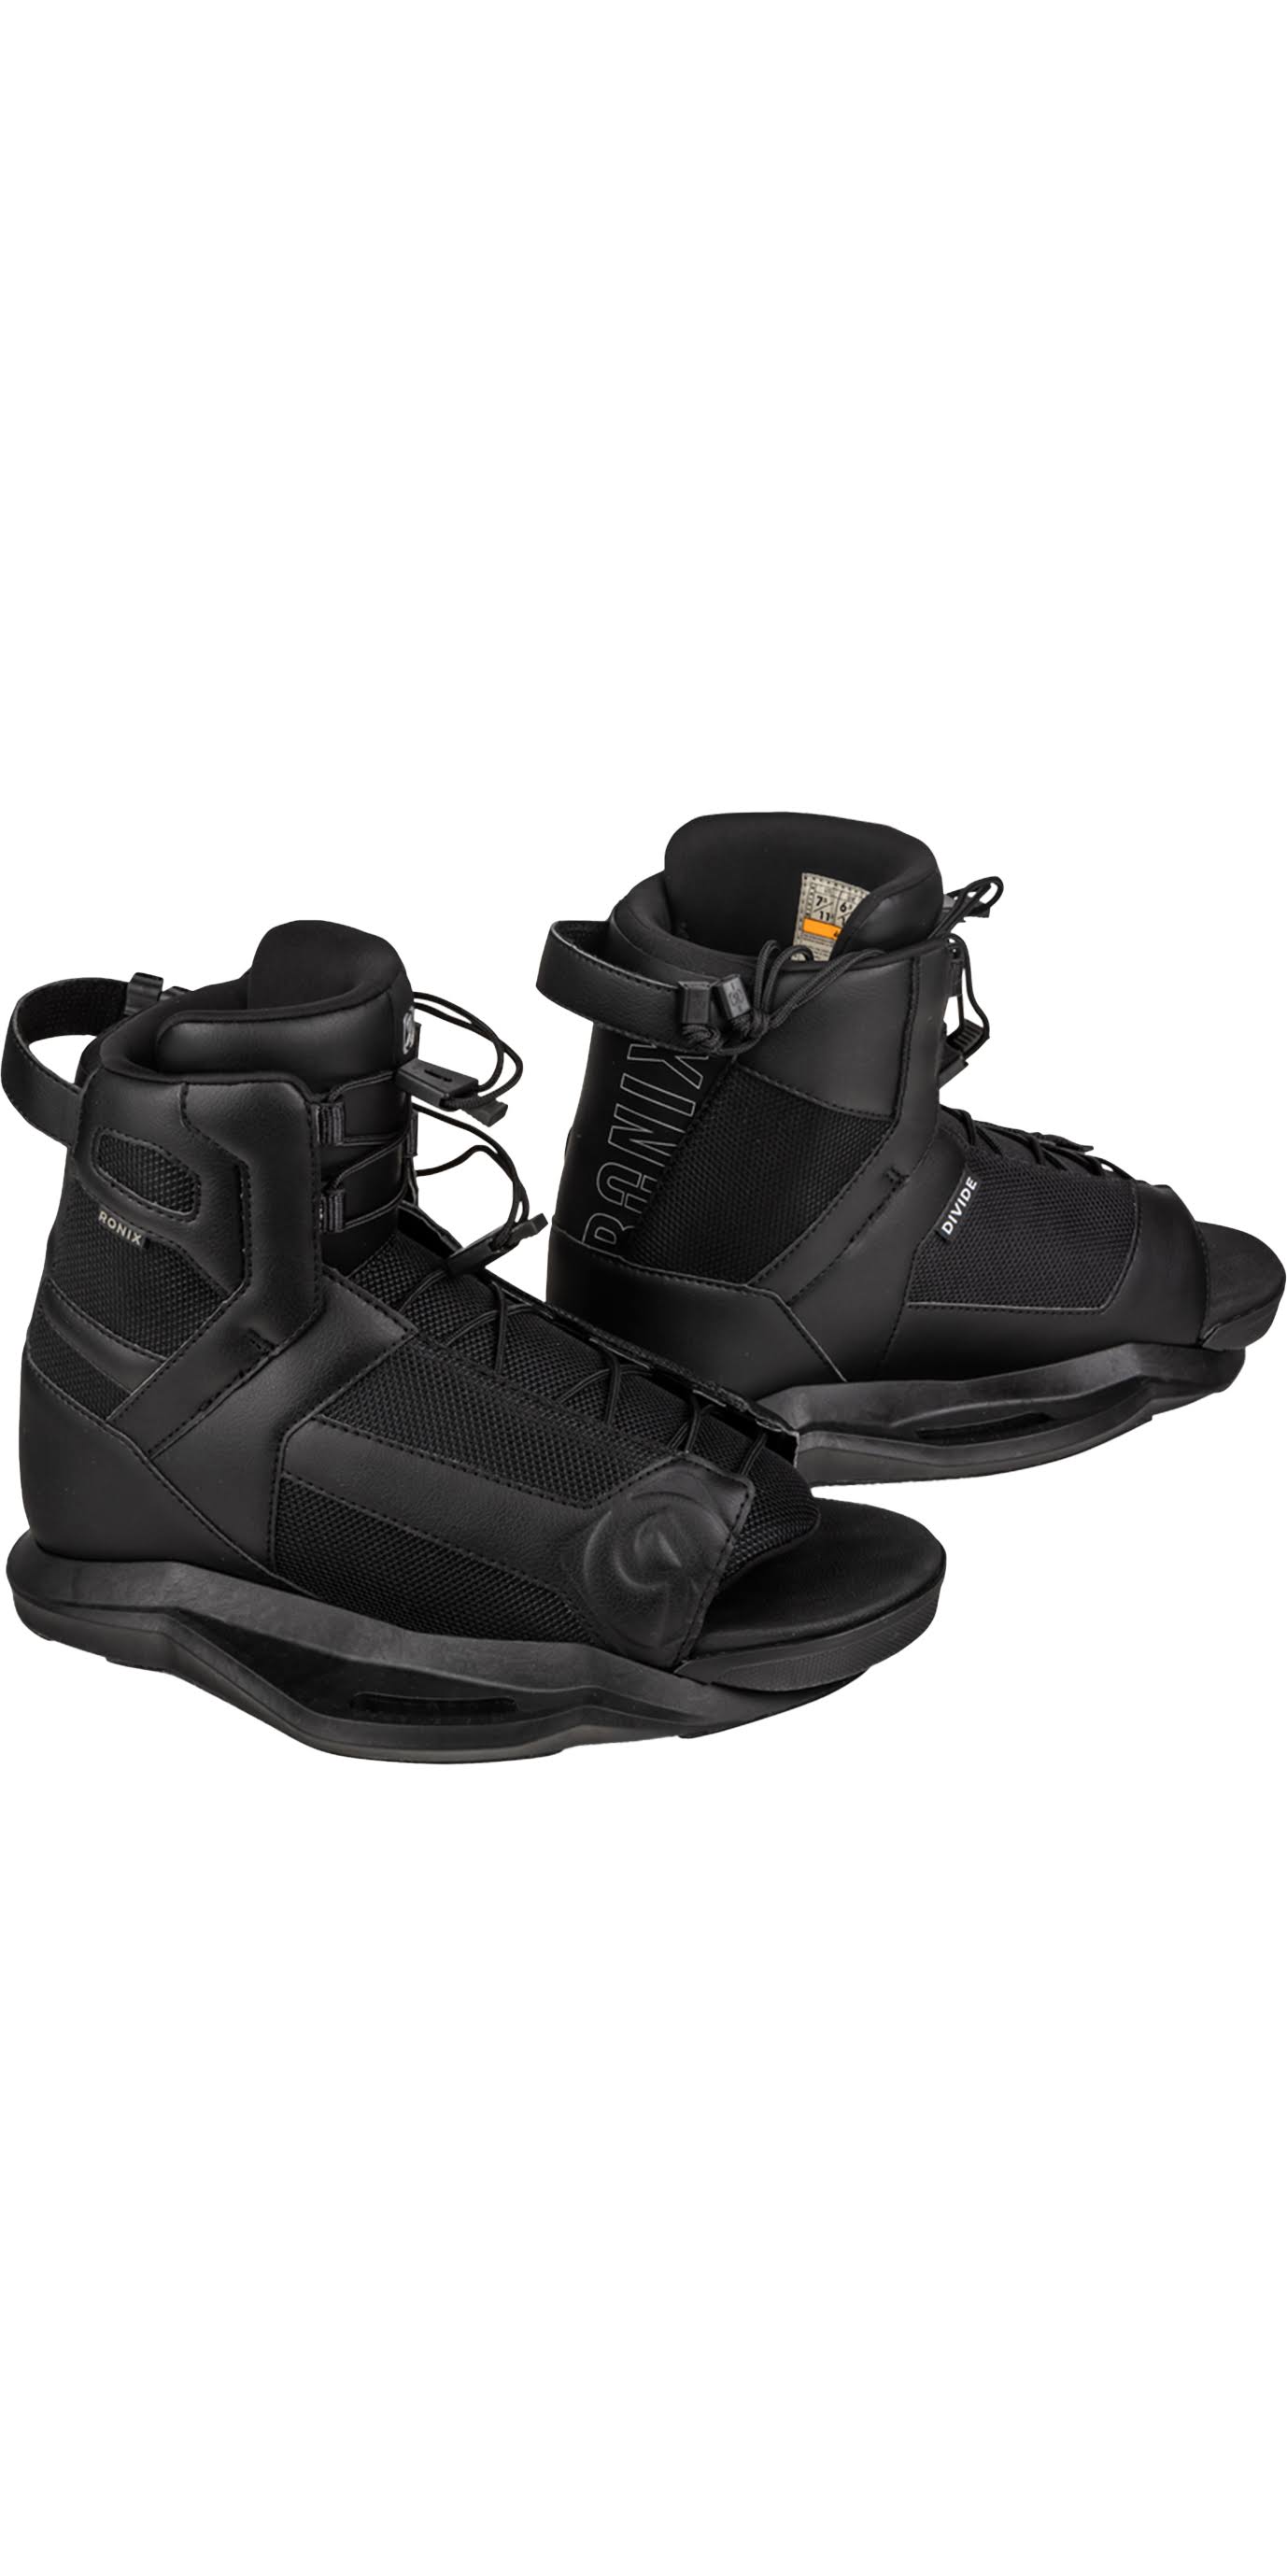 Ronix Divide Wakeboard Boots - 10.5-14.5 Black